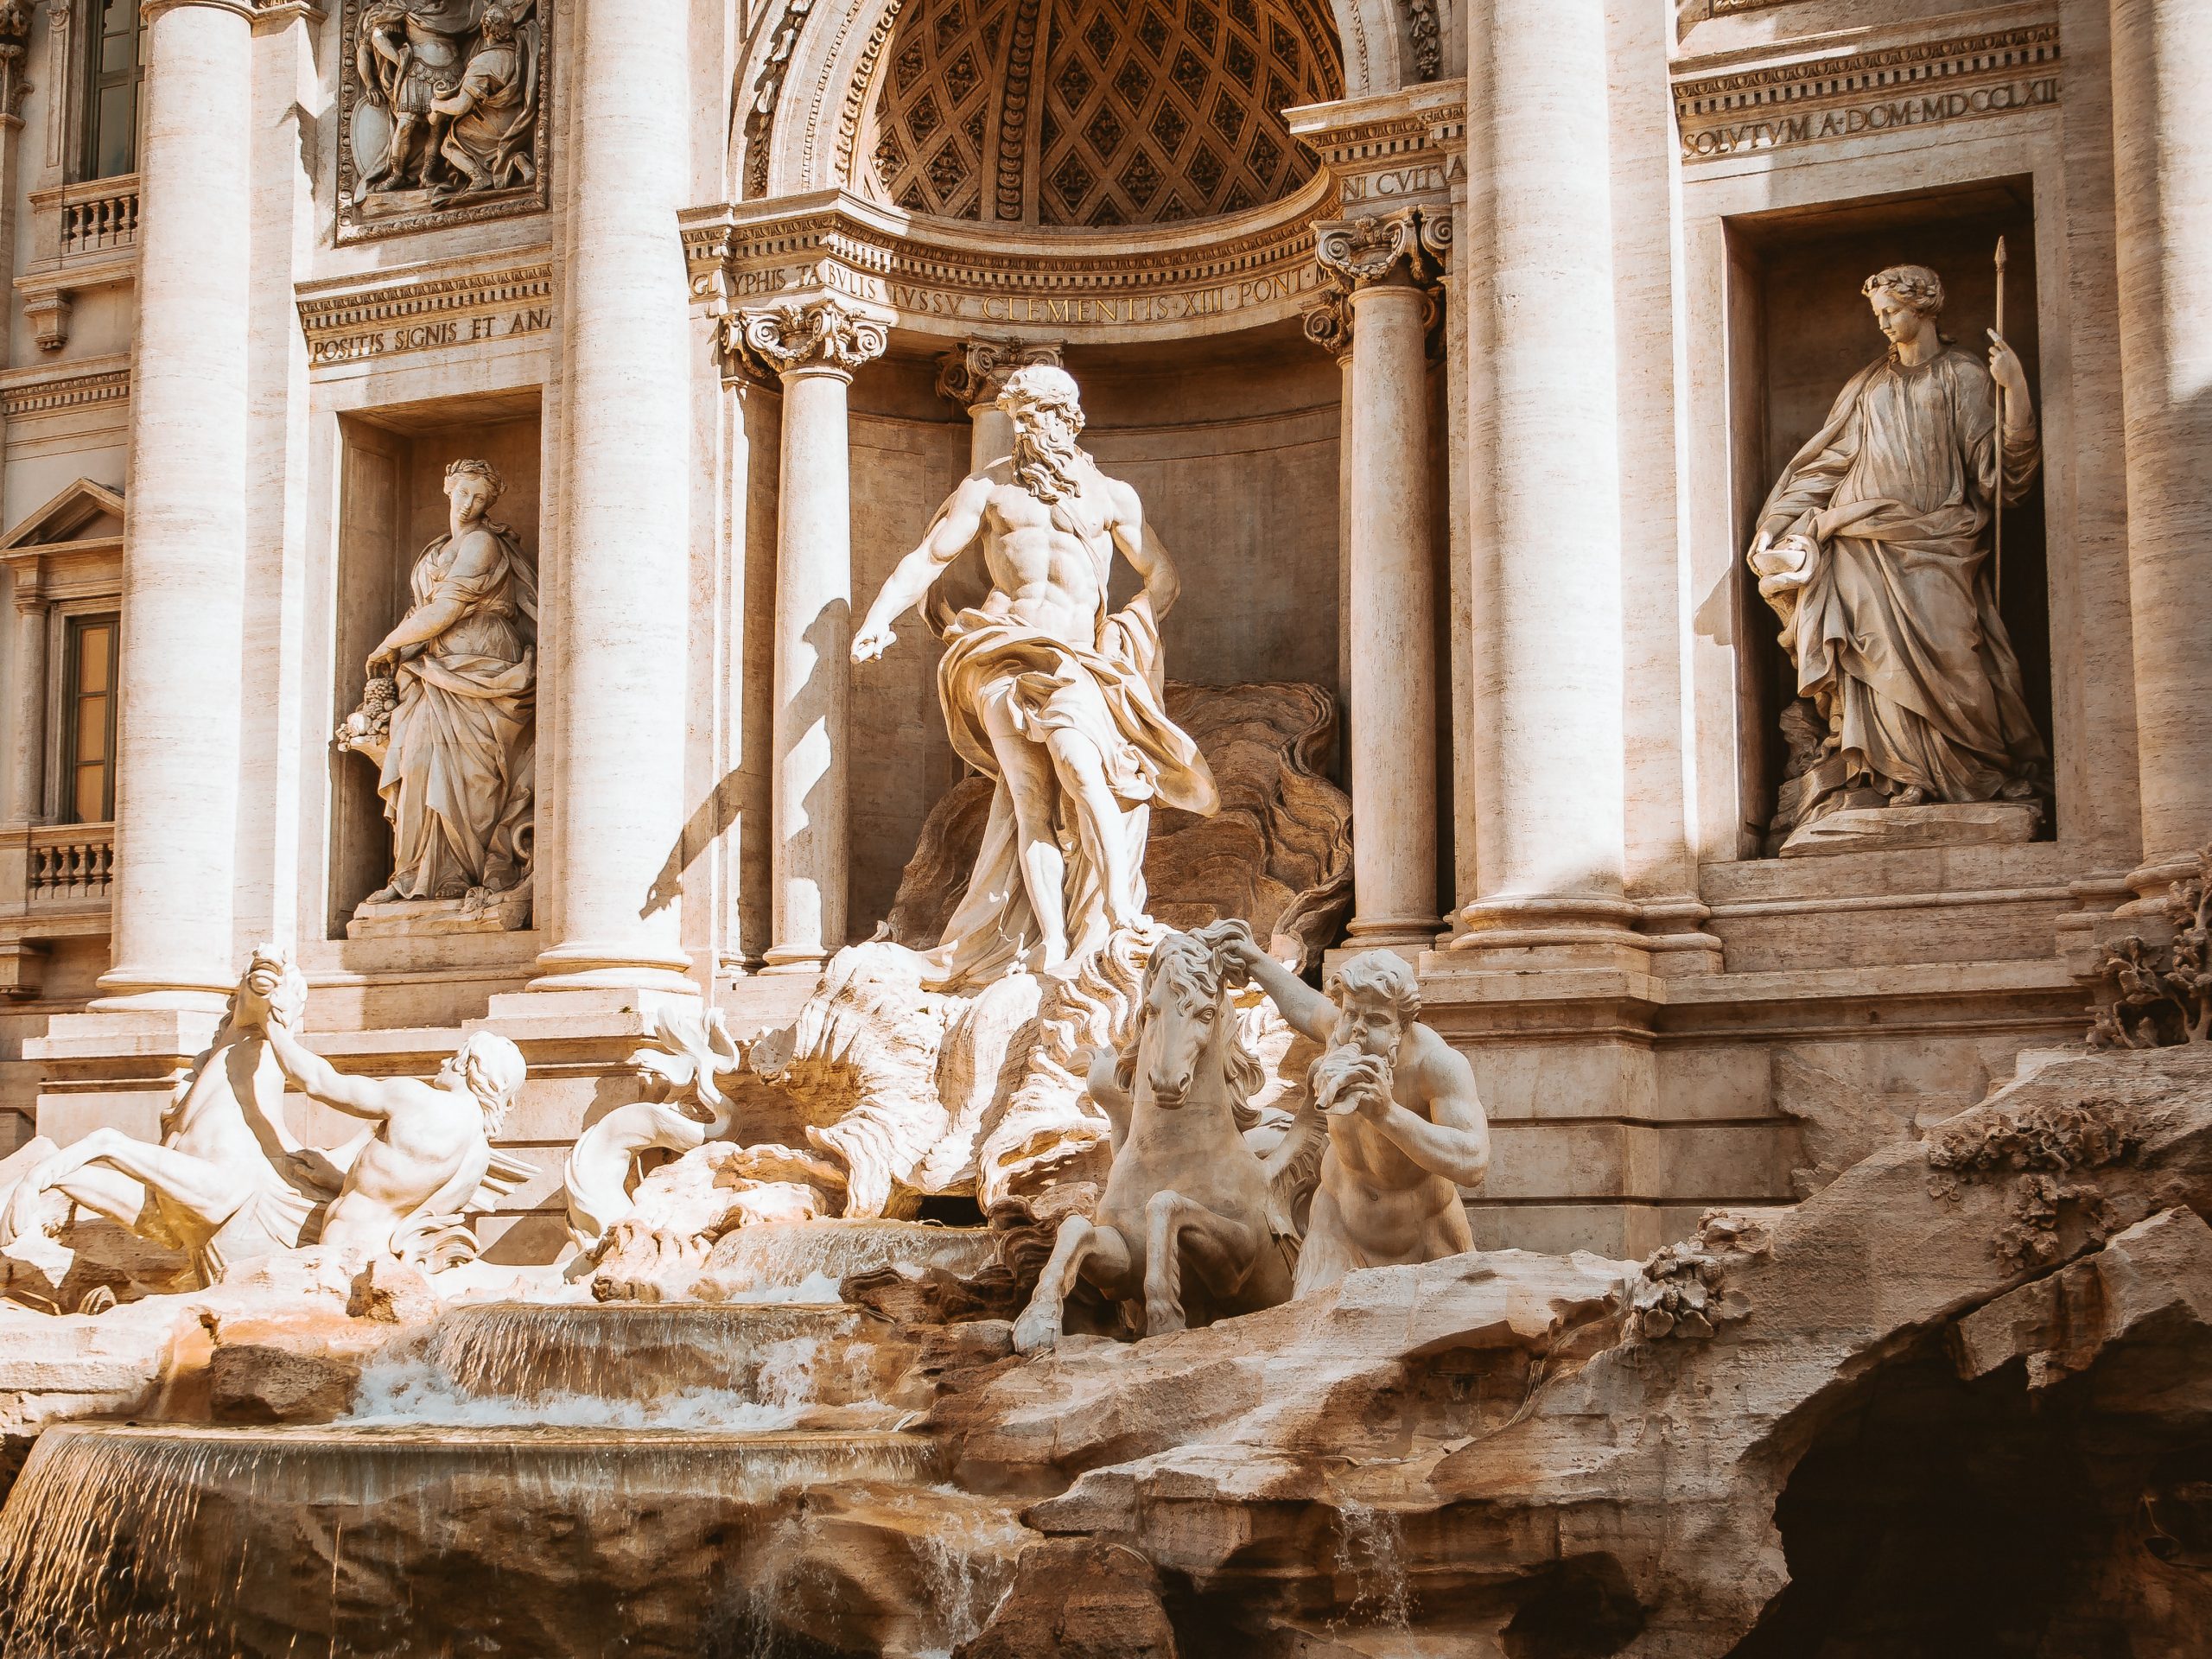 Week end a roma, Baroque Rome Trevi Fountain Rome Baroque Roma La fountaine de Trevi Barocca Fontana di Trevi photo by Christopher Czermak unsplash